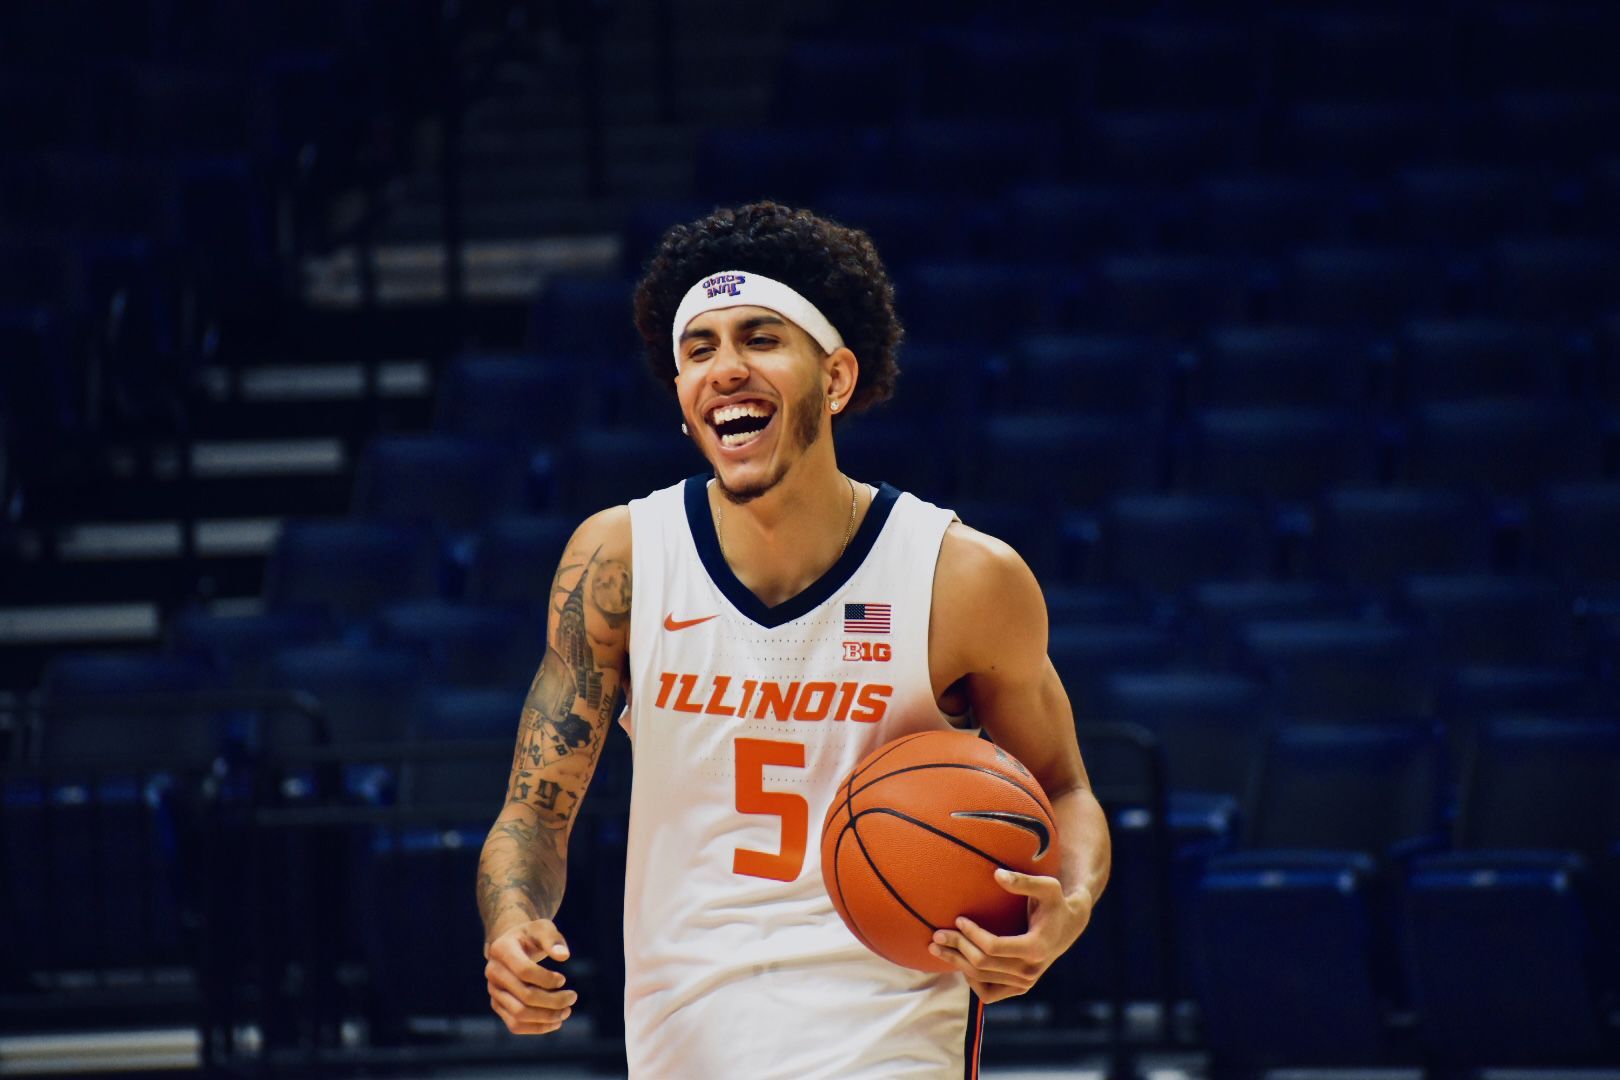 Illinois basketball invites fans for open practice